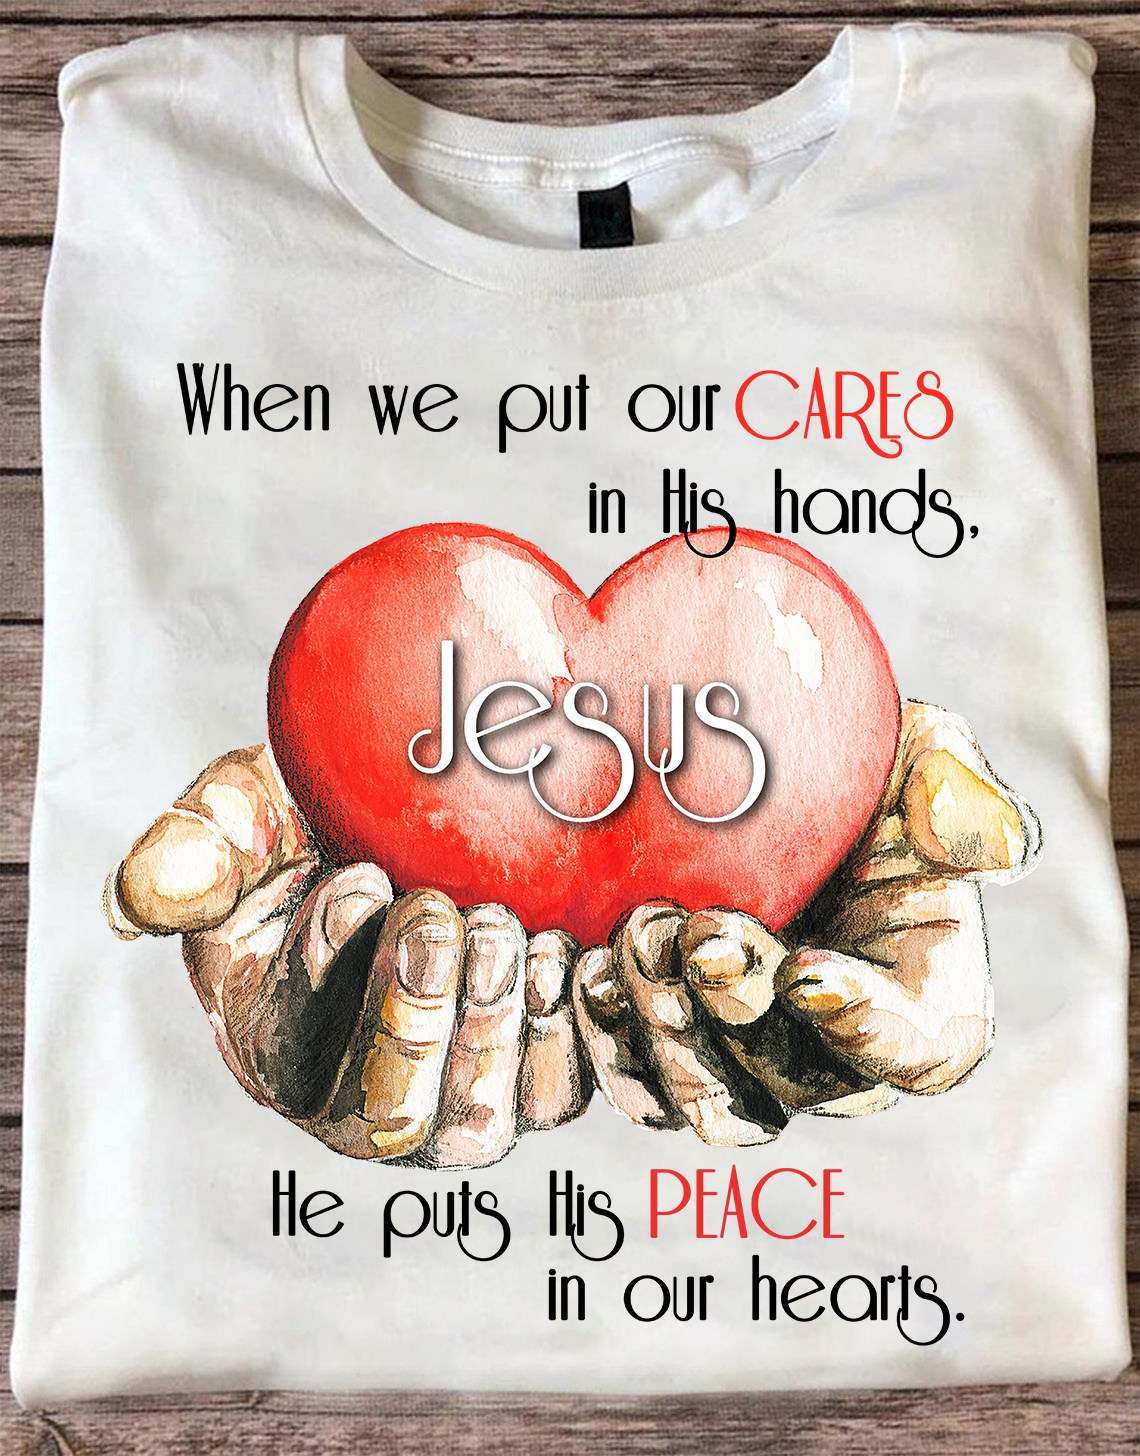 When we put our cares in his hands he puts his peace in our hearts - Jesus the god